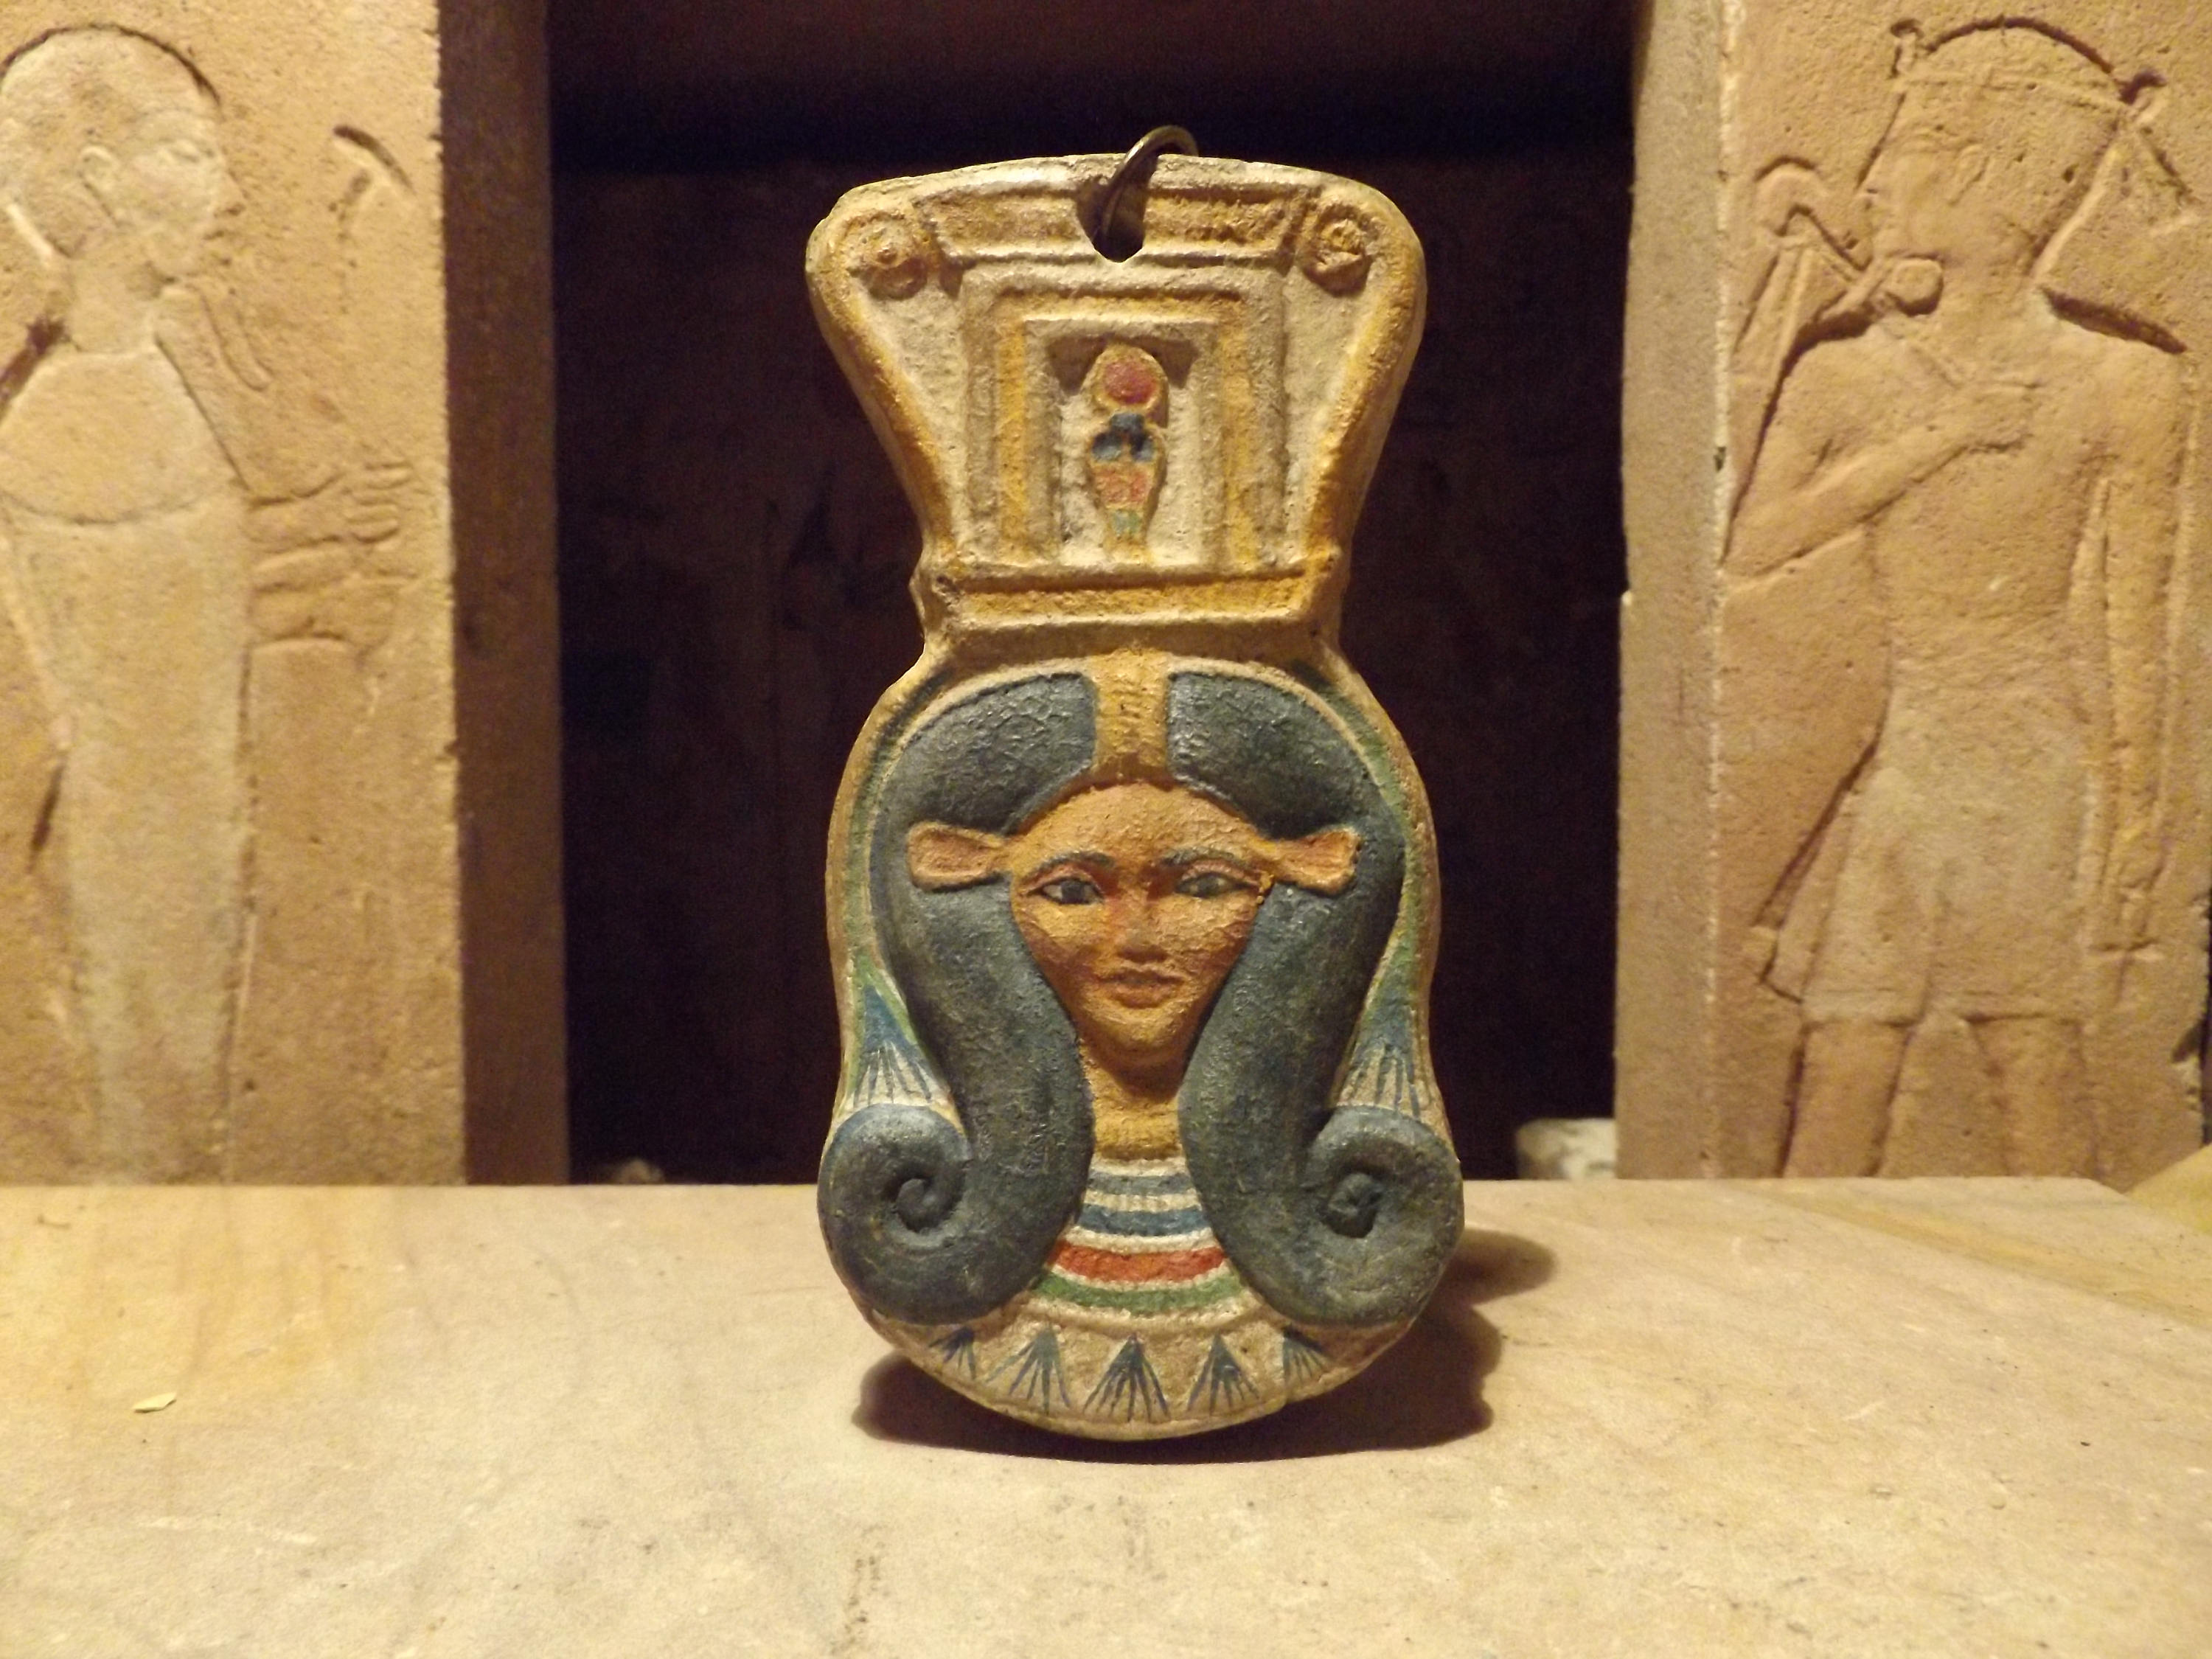 32 - Hathor of color, artifact from Egypt, earthlings were called the "black-headed"